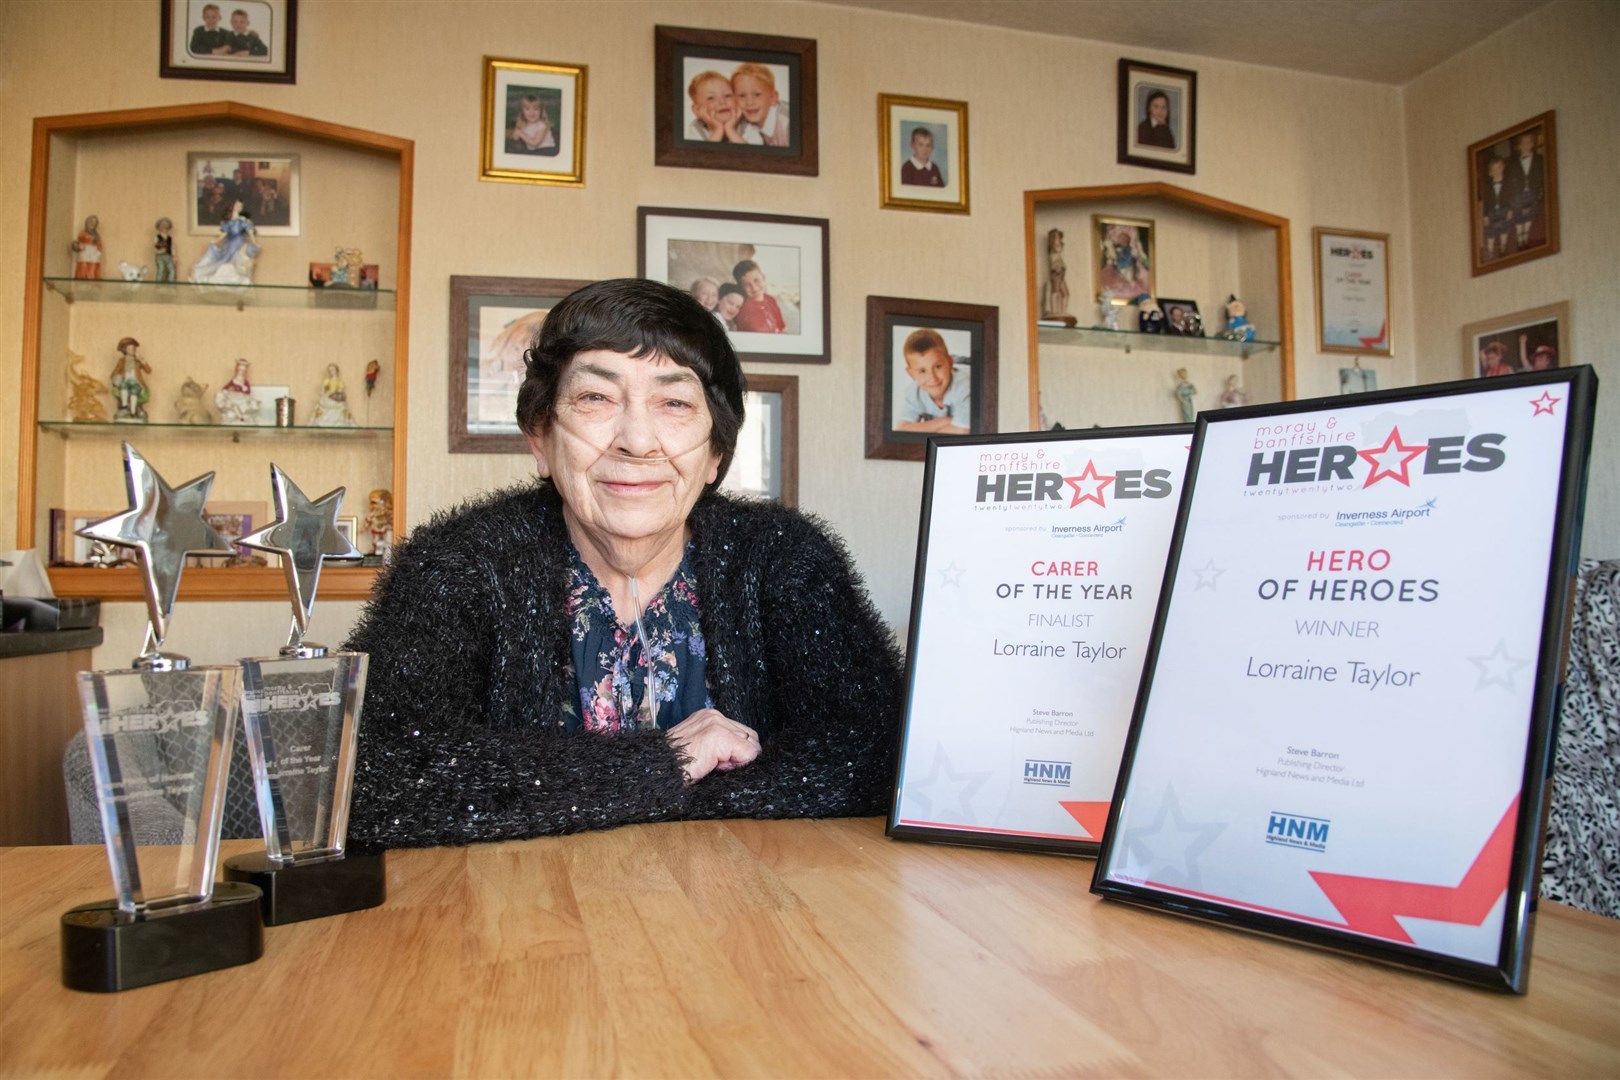 Lorraine Taylor, Banff was named 2022 hero of heroes and carer of the year. Picture: Daniel Forsyth